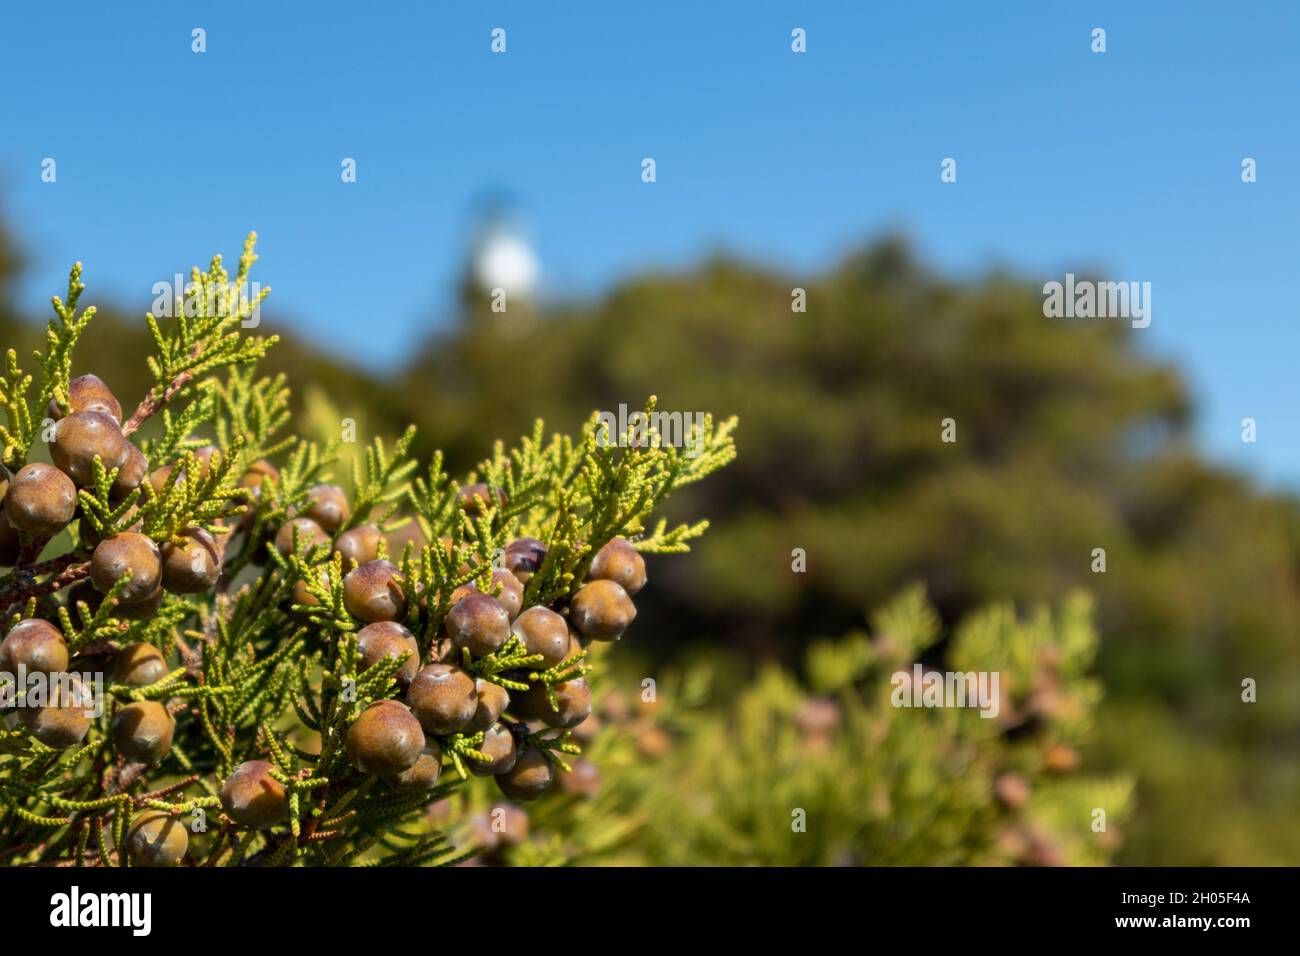 Green Juniperus excelsa with berries, the Greek juniper evergreen tree branch vibrant close-up with blur, Mediterranean sea, Greece Stock Photo